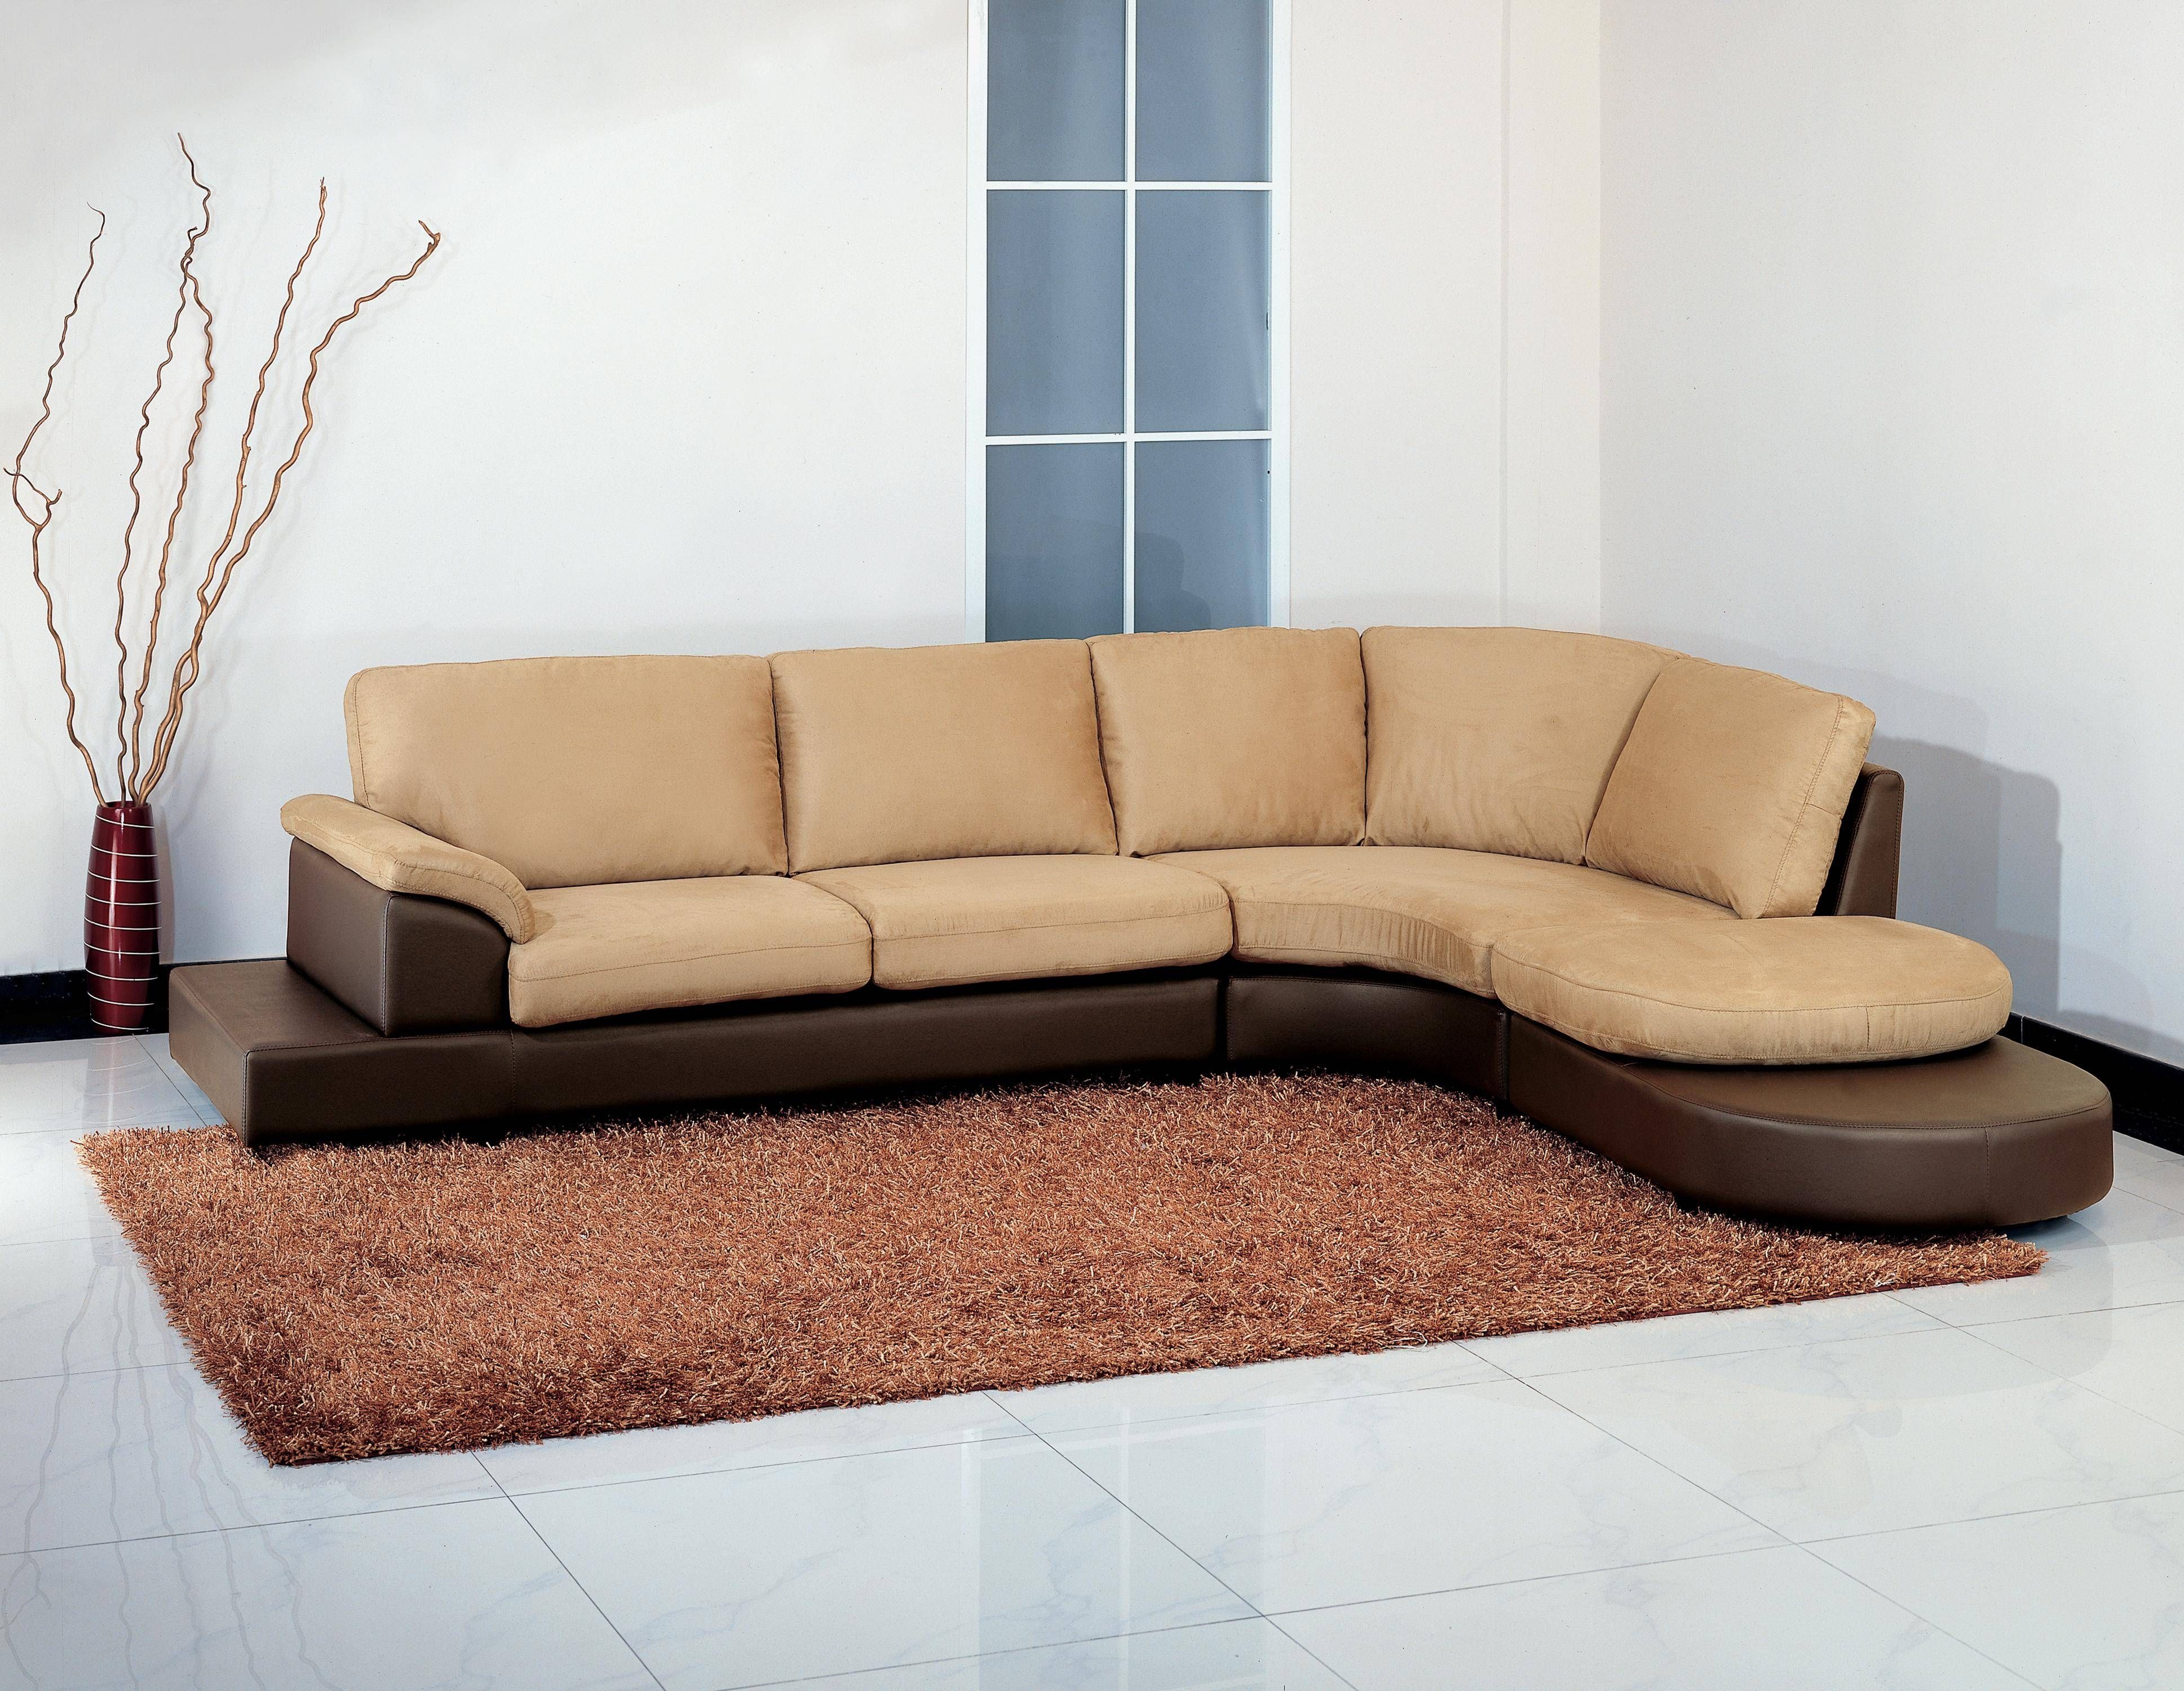 Abbyson Living Charlotte Beige Sectional Sofa And Ottoman Intended For Abbyson Living Sectional Sofas (View 13 of 15)